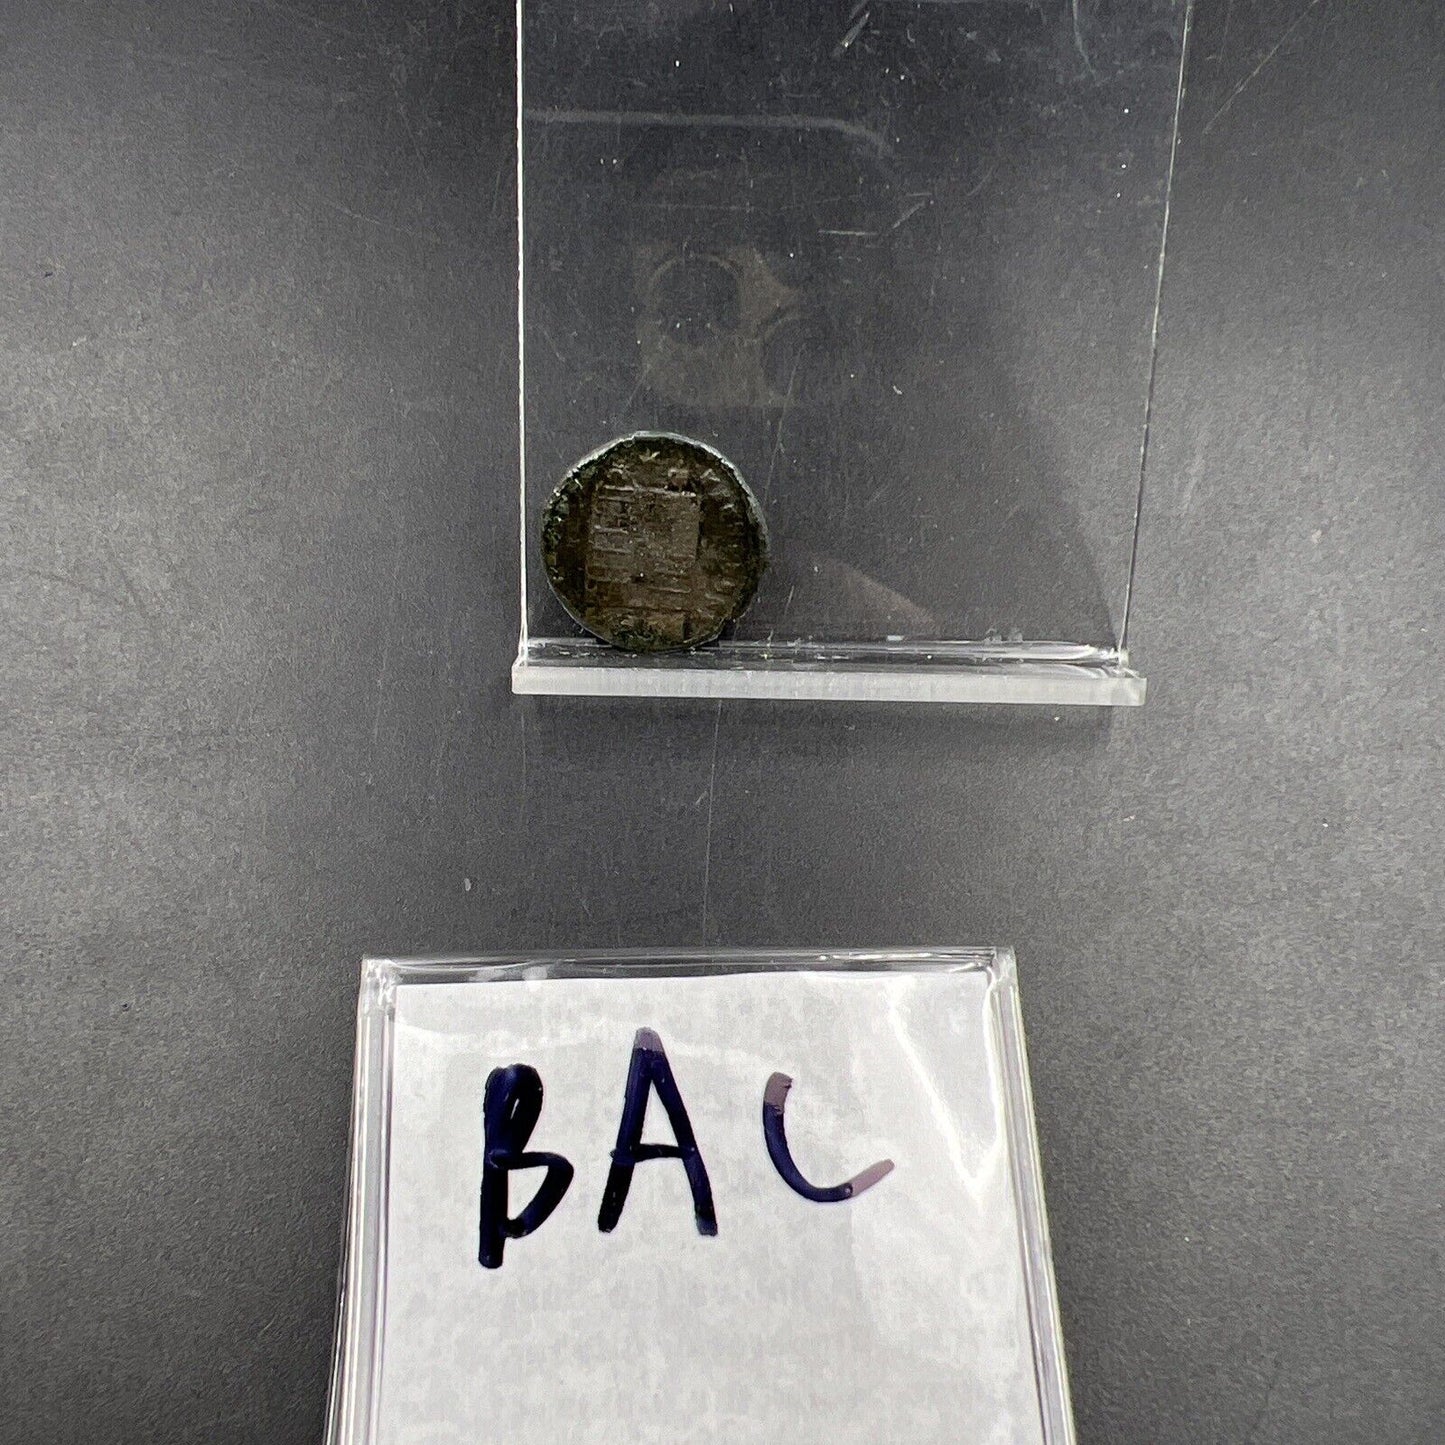 Ancient Roman Bronze Coin Circulated condition uncleaned - SKU #BAC11324BAC